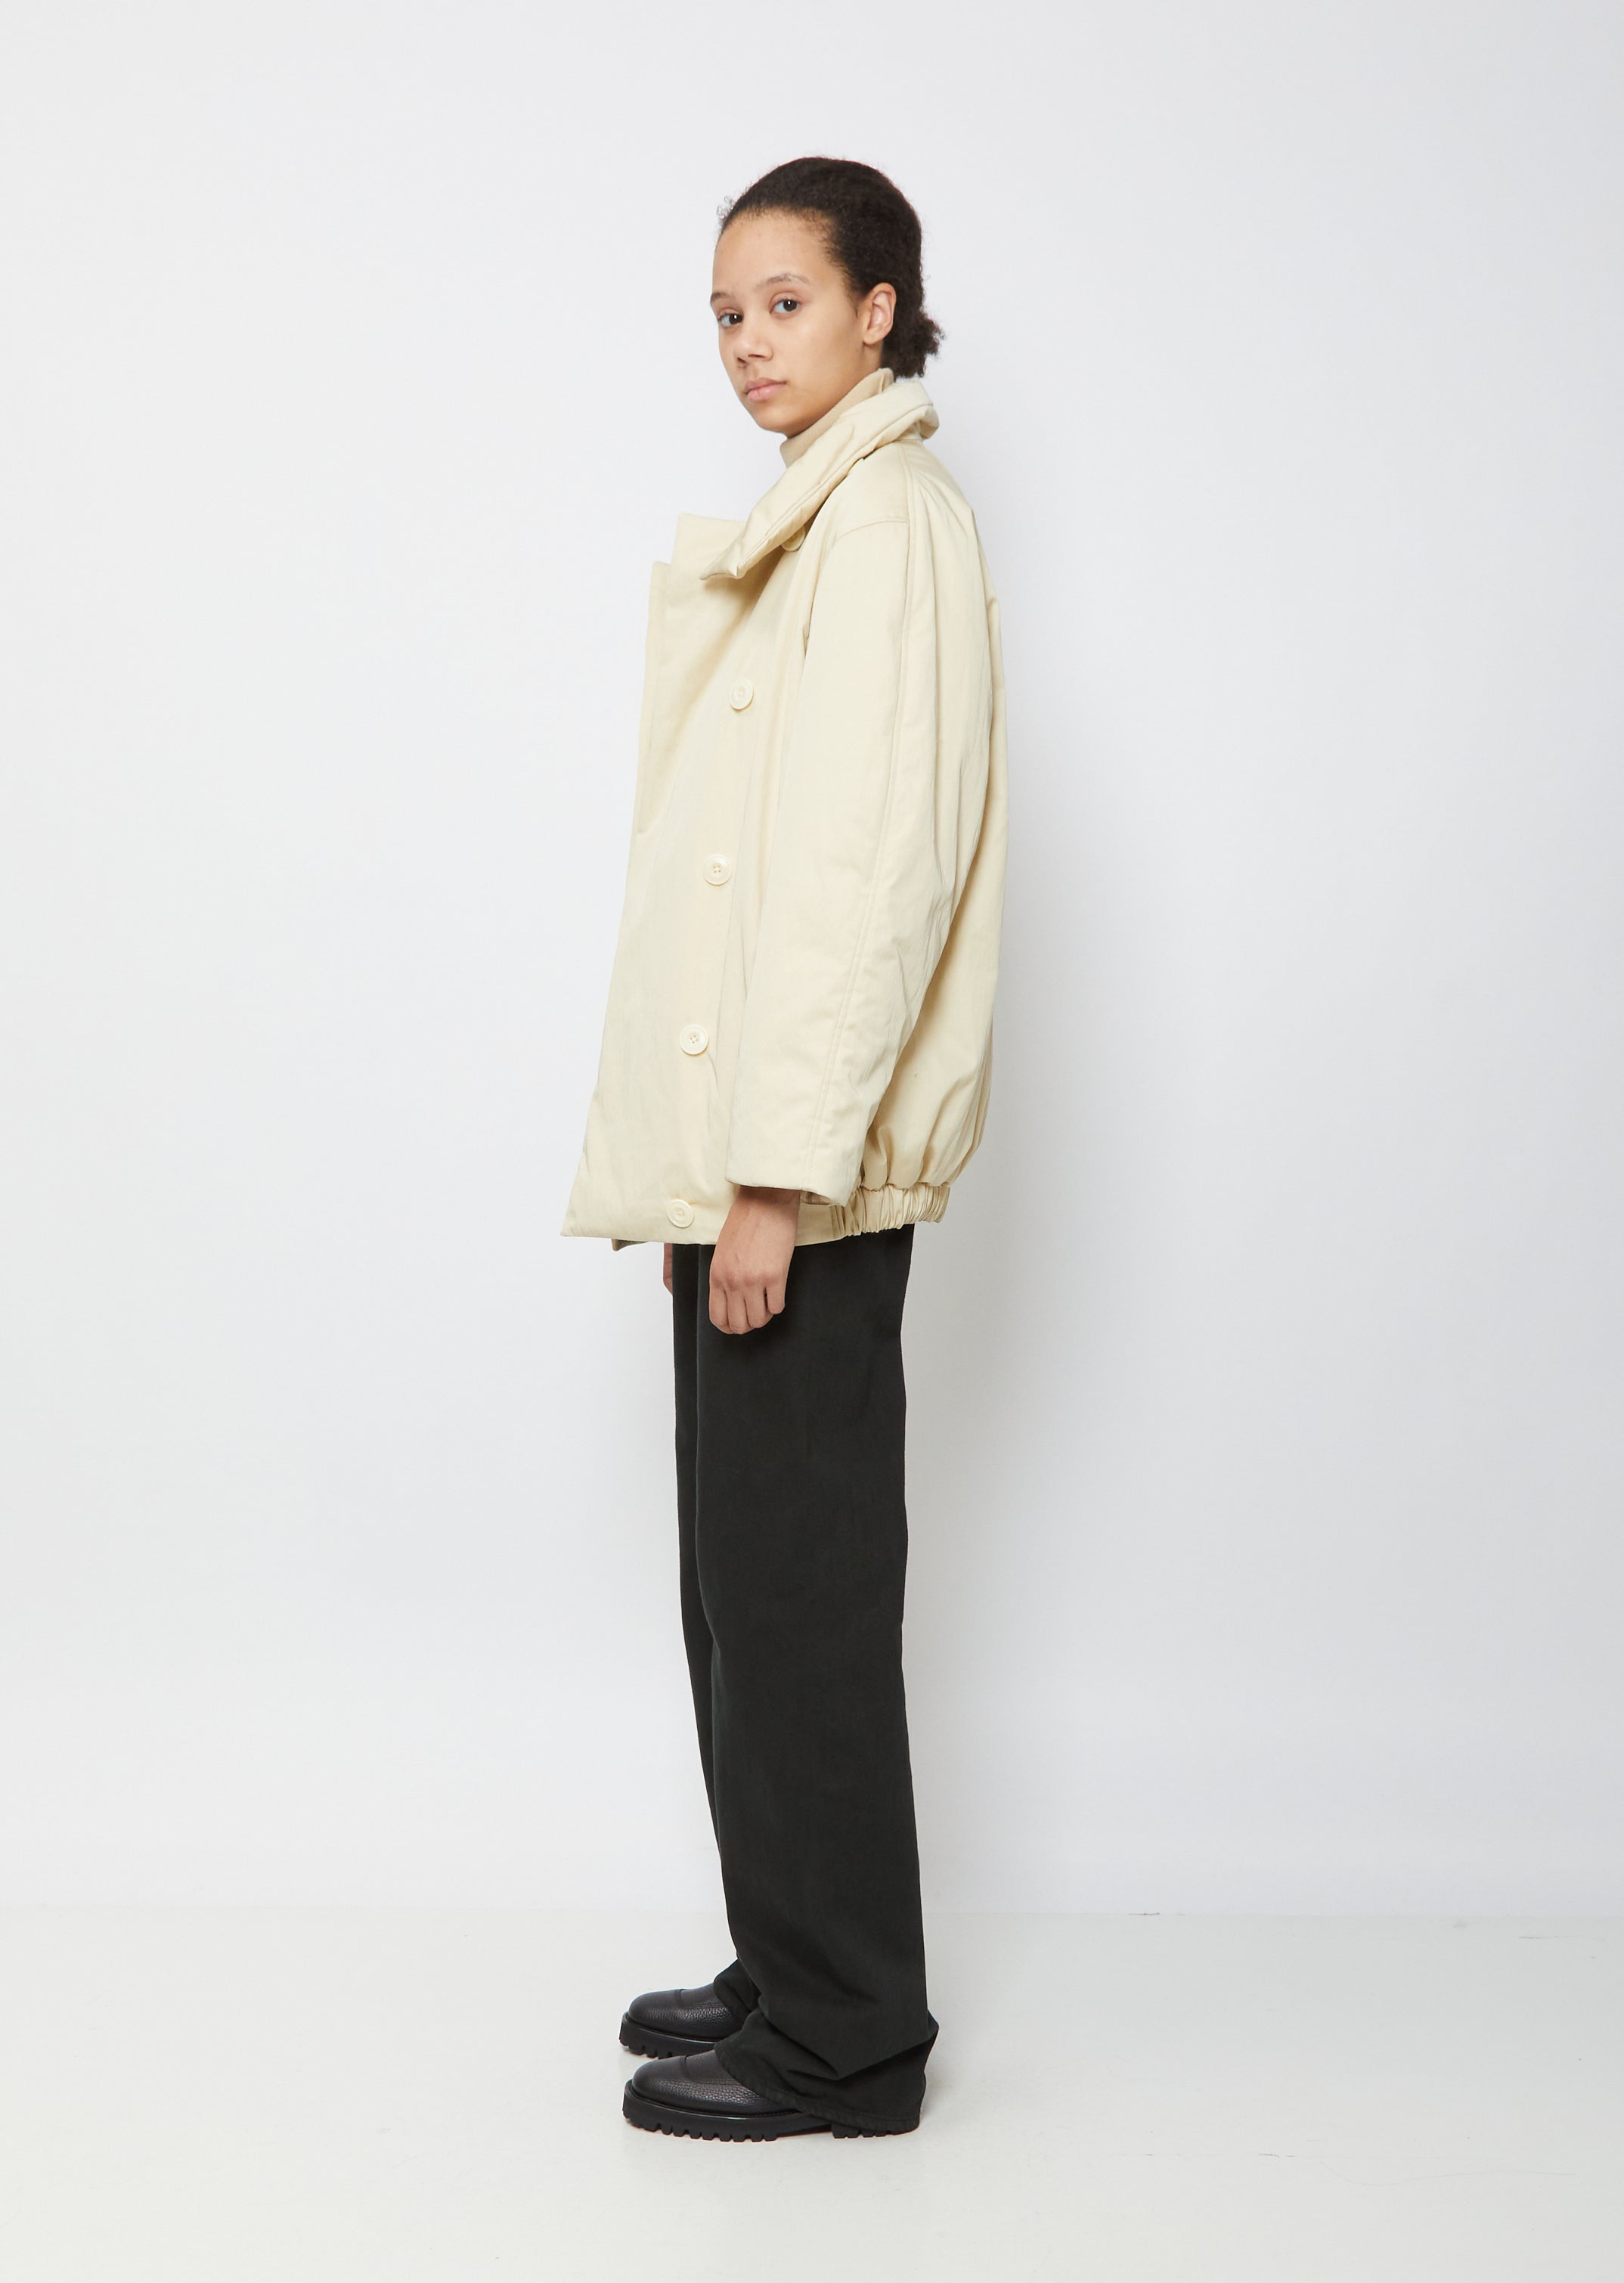 OAMCオーエーエムシー美品　Lemaire ASYMETRICAL JACKET サイズ46